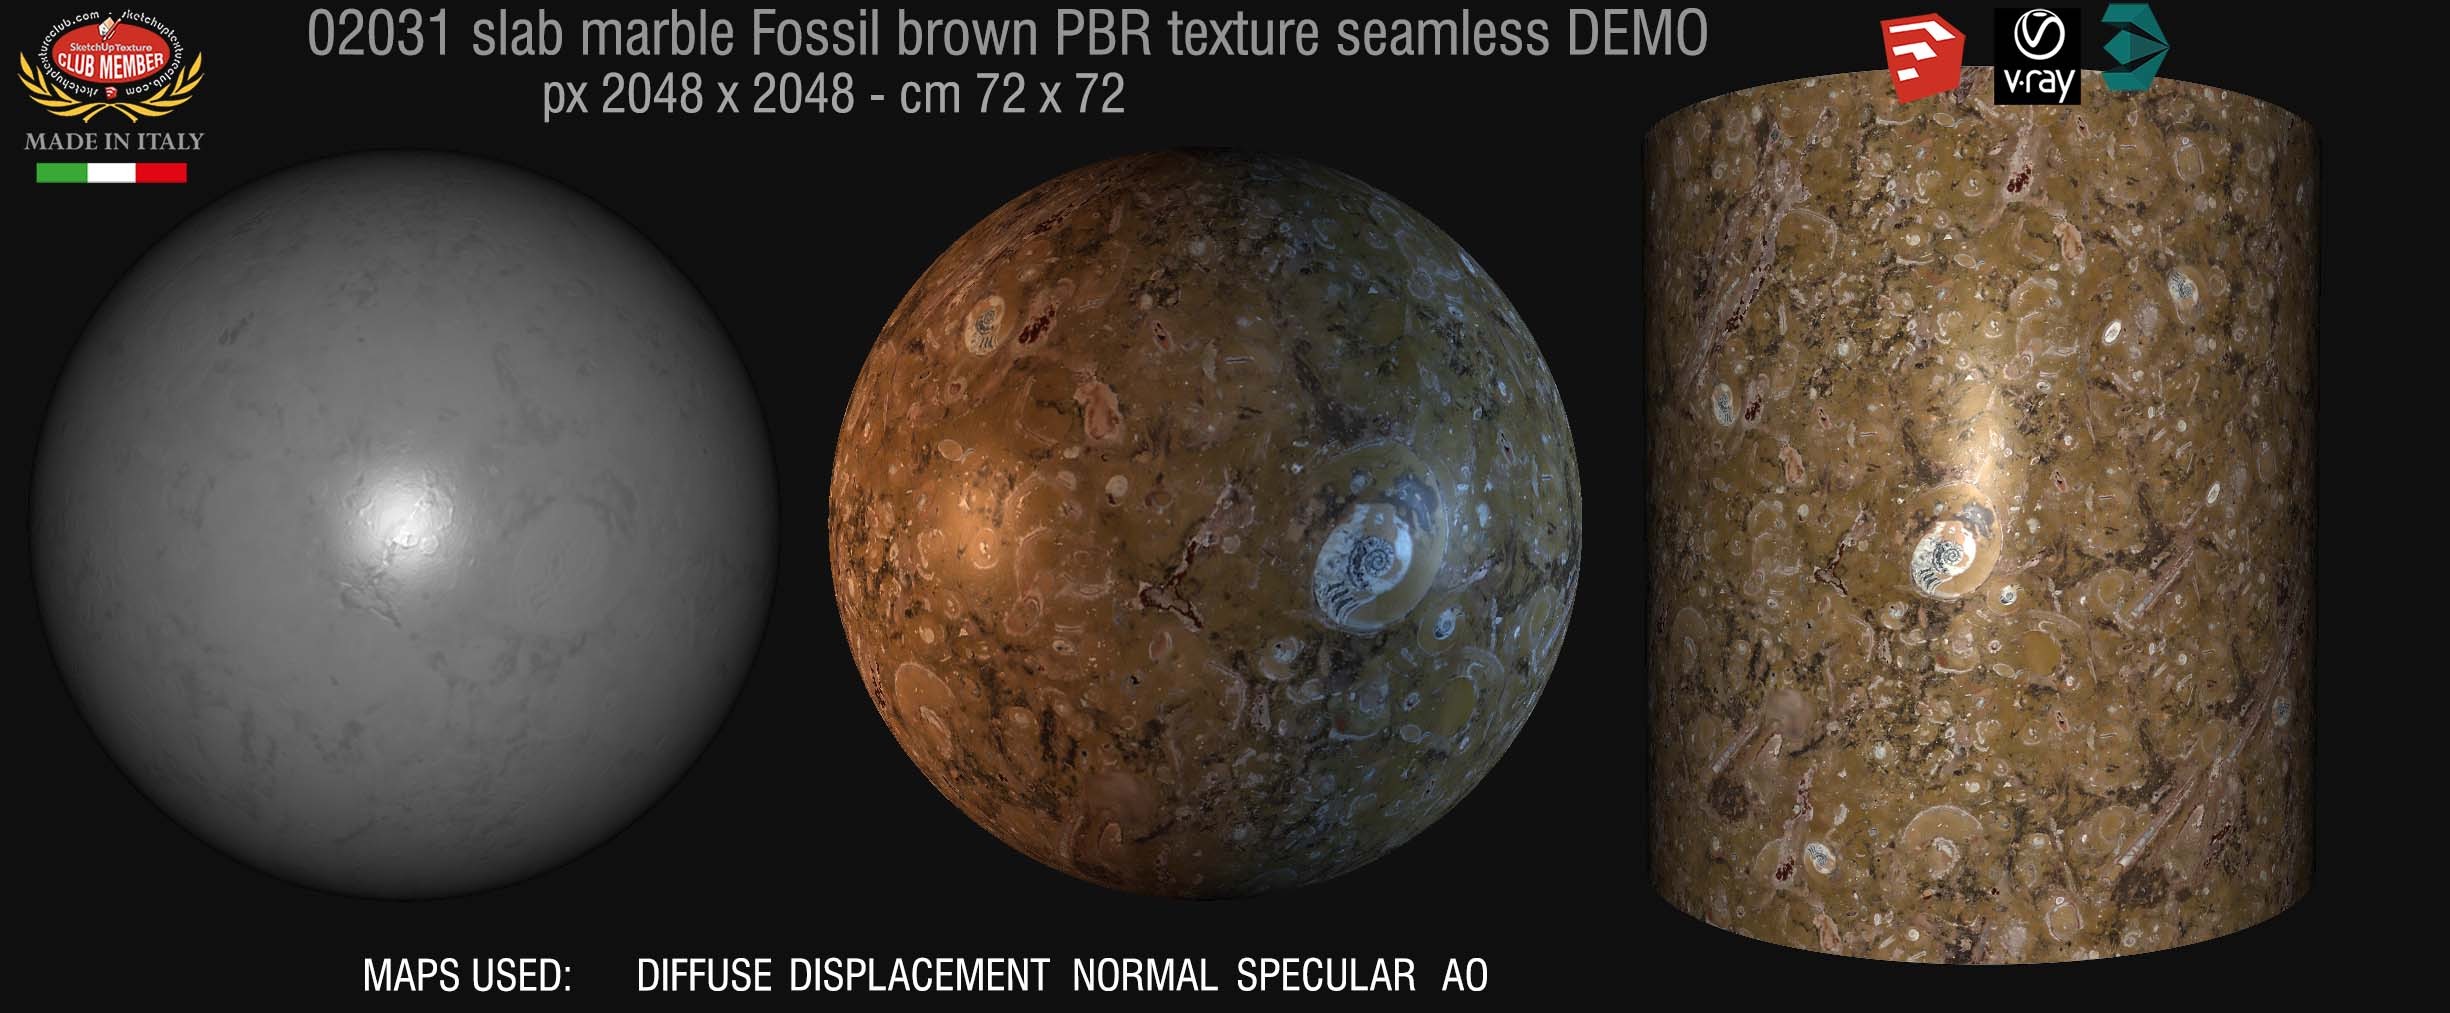 02031 slab marble fossil brown PBR texture seamless DEMO